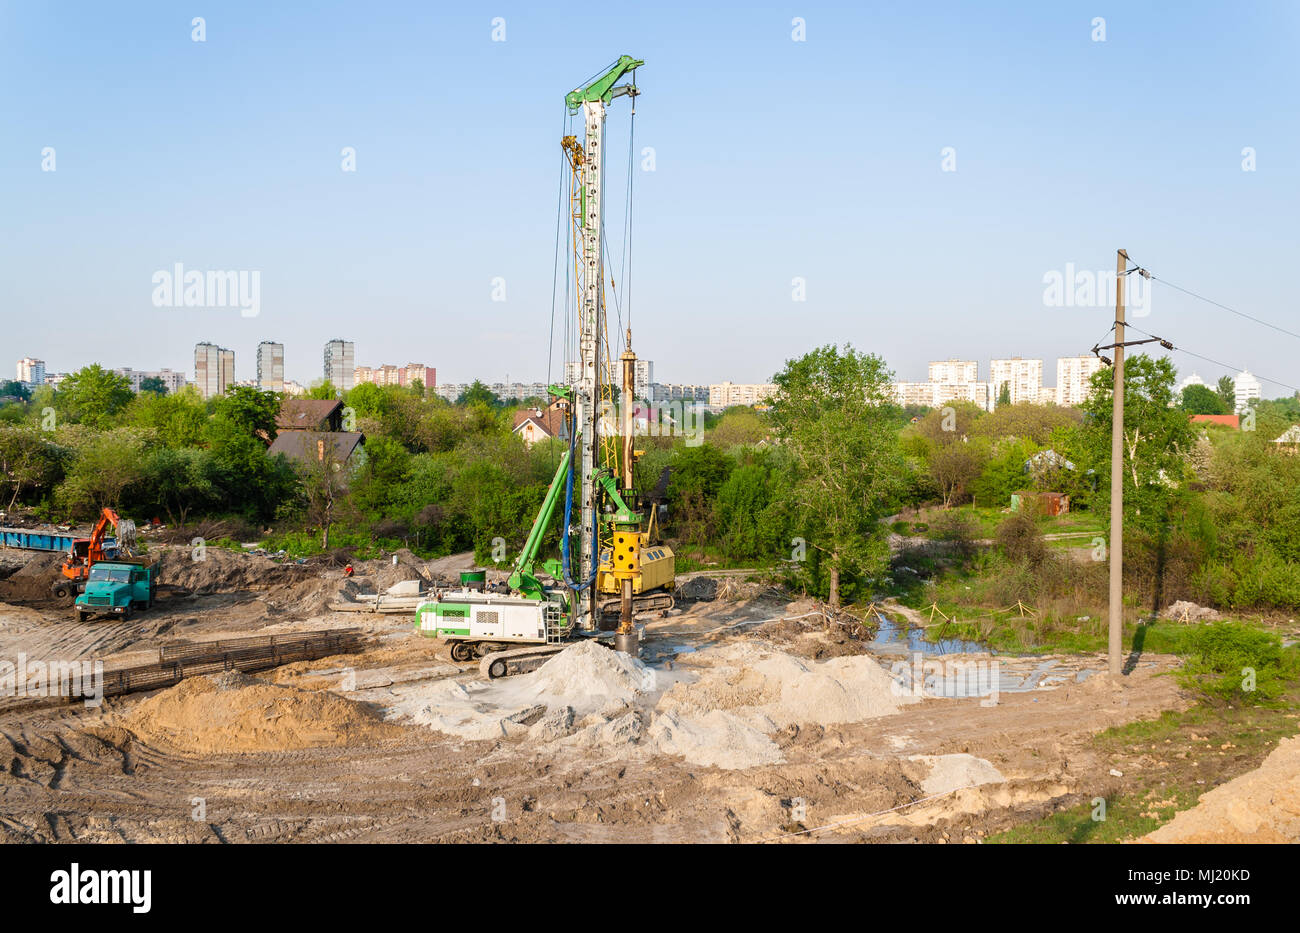 Pile driver at a construction site Stock Photo